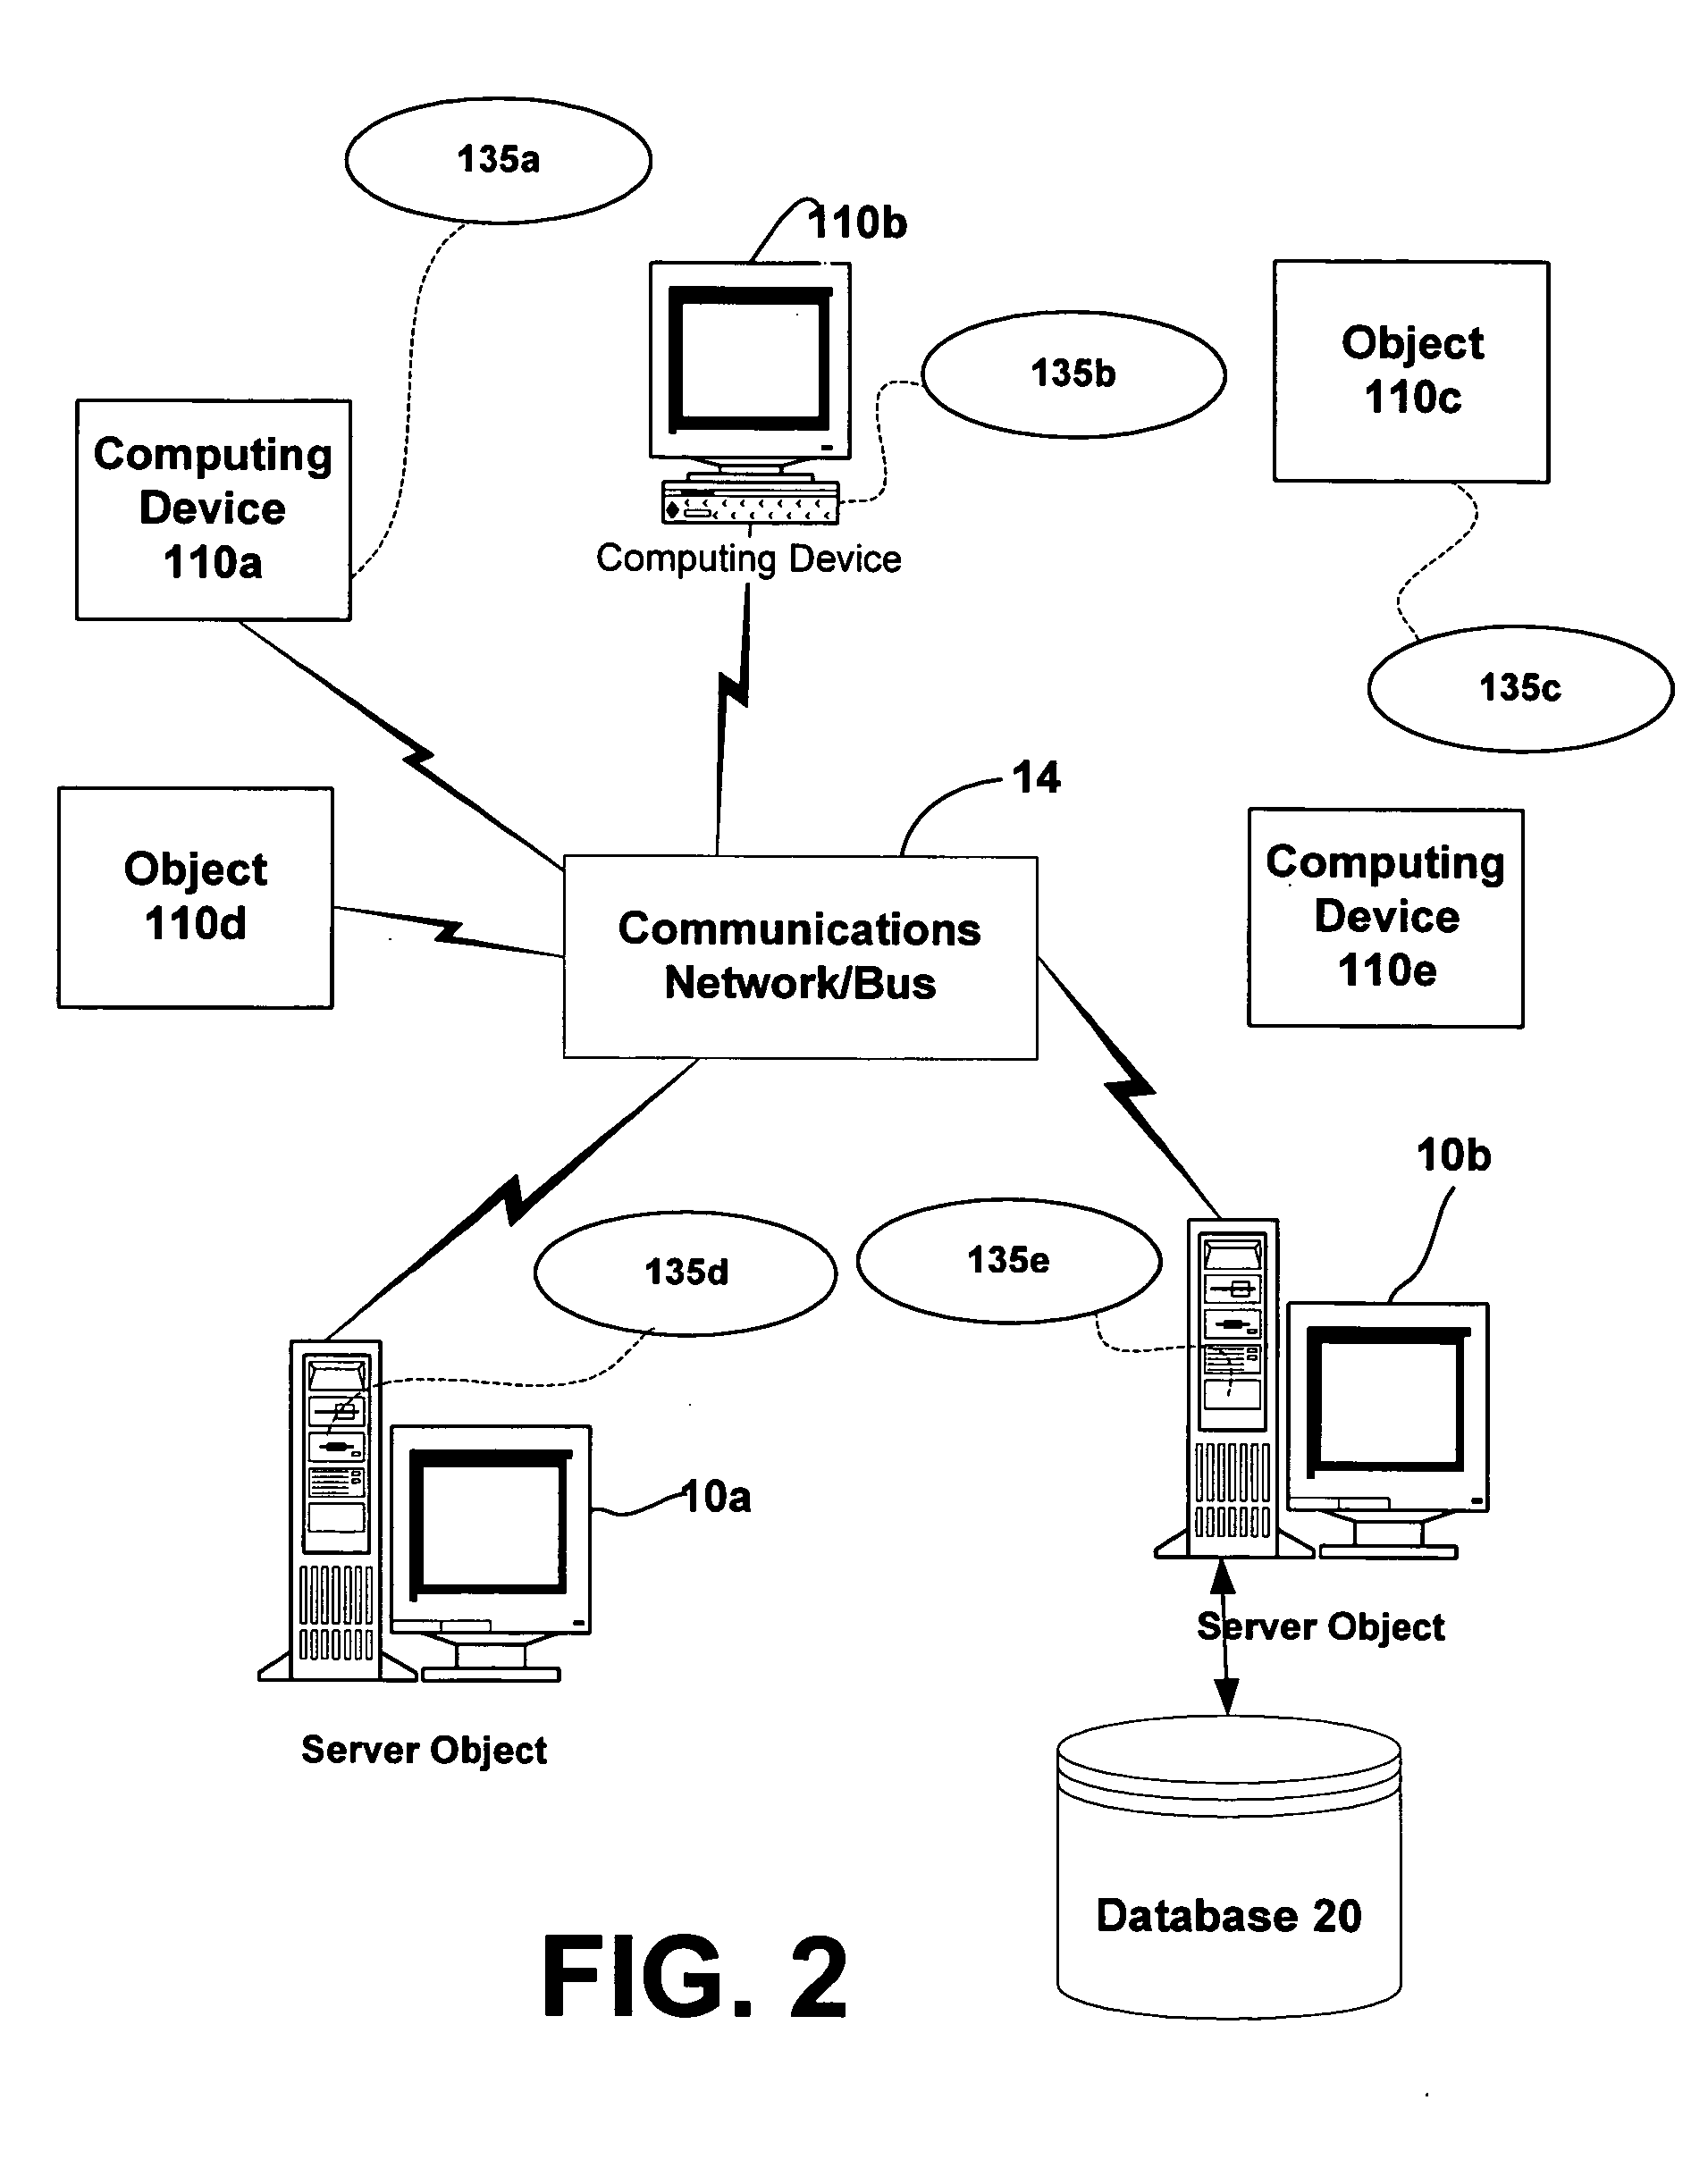 First computer process and second computer process proxy-executing code from third computer process on behalf of first process